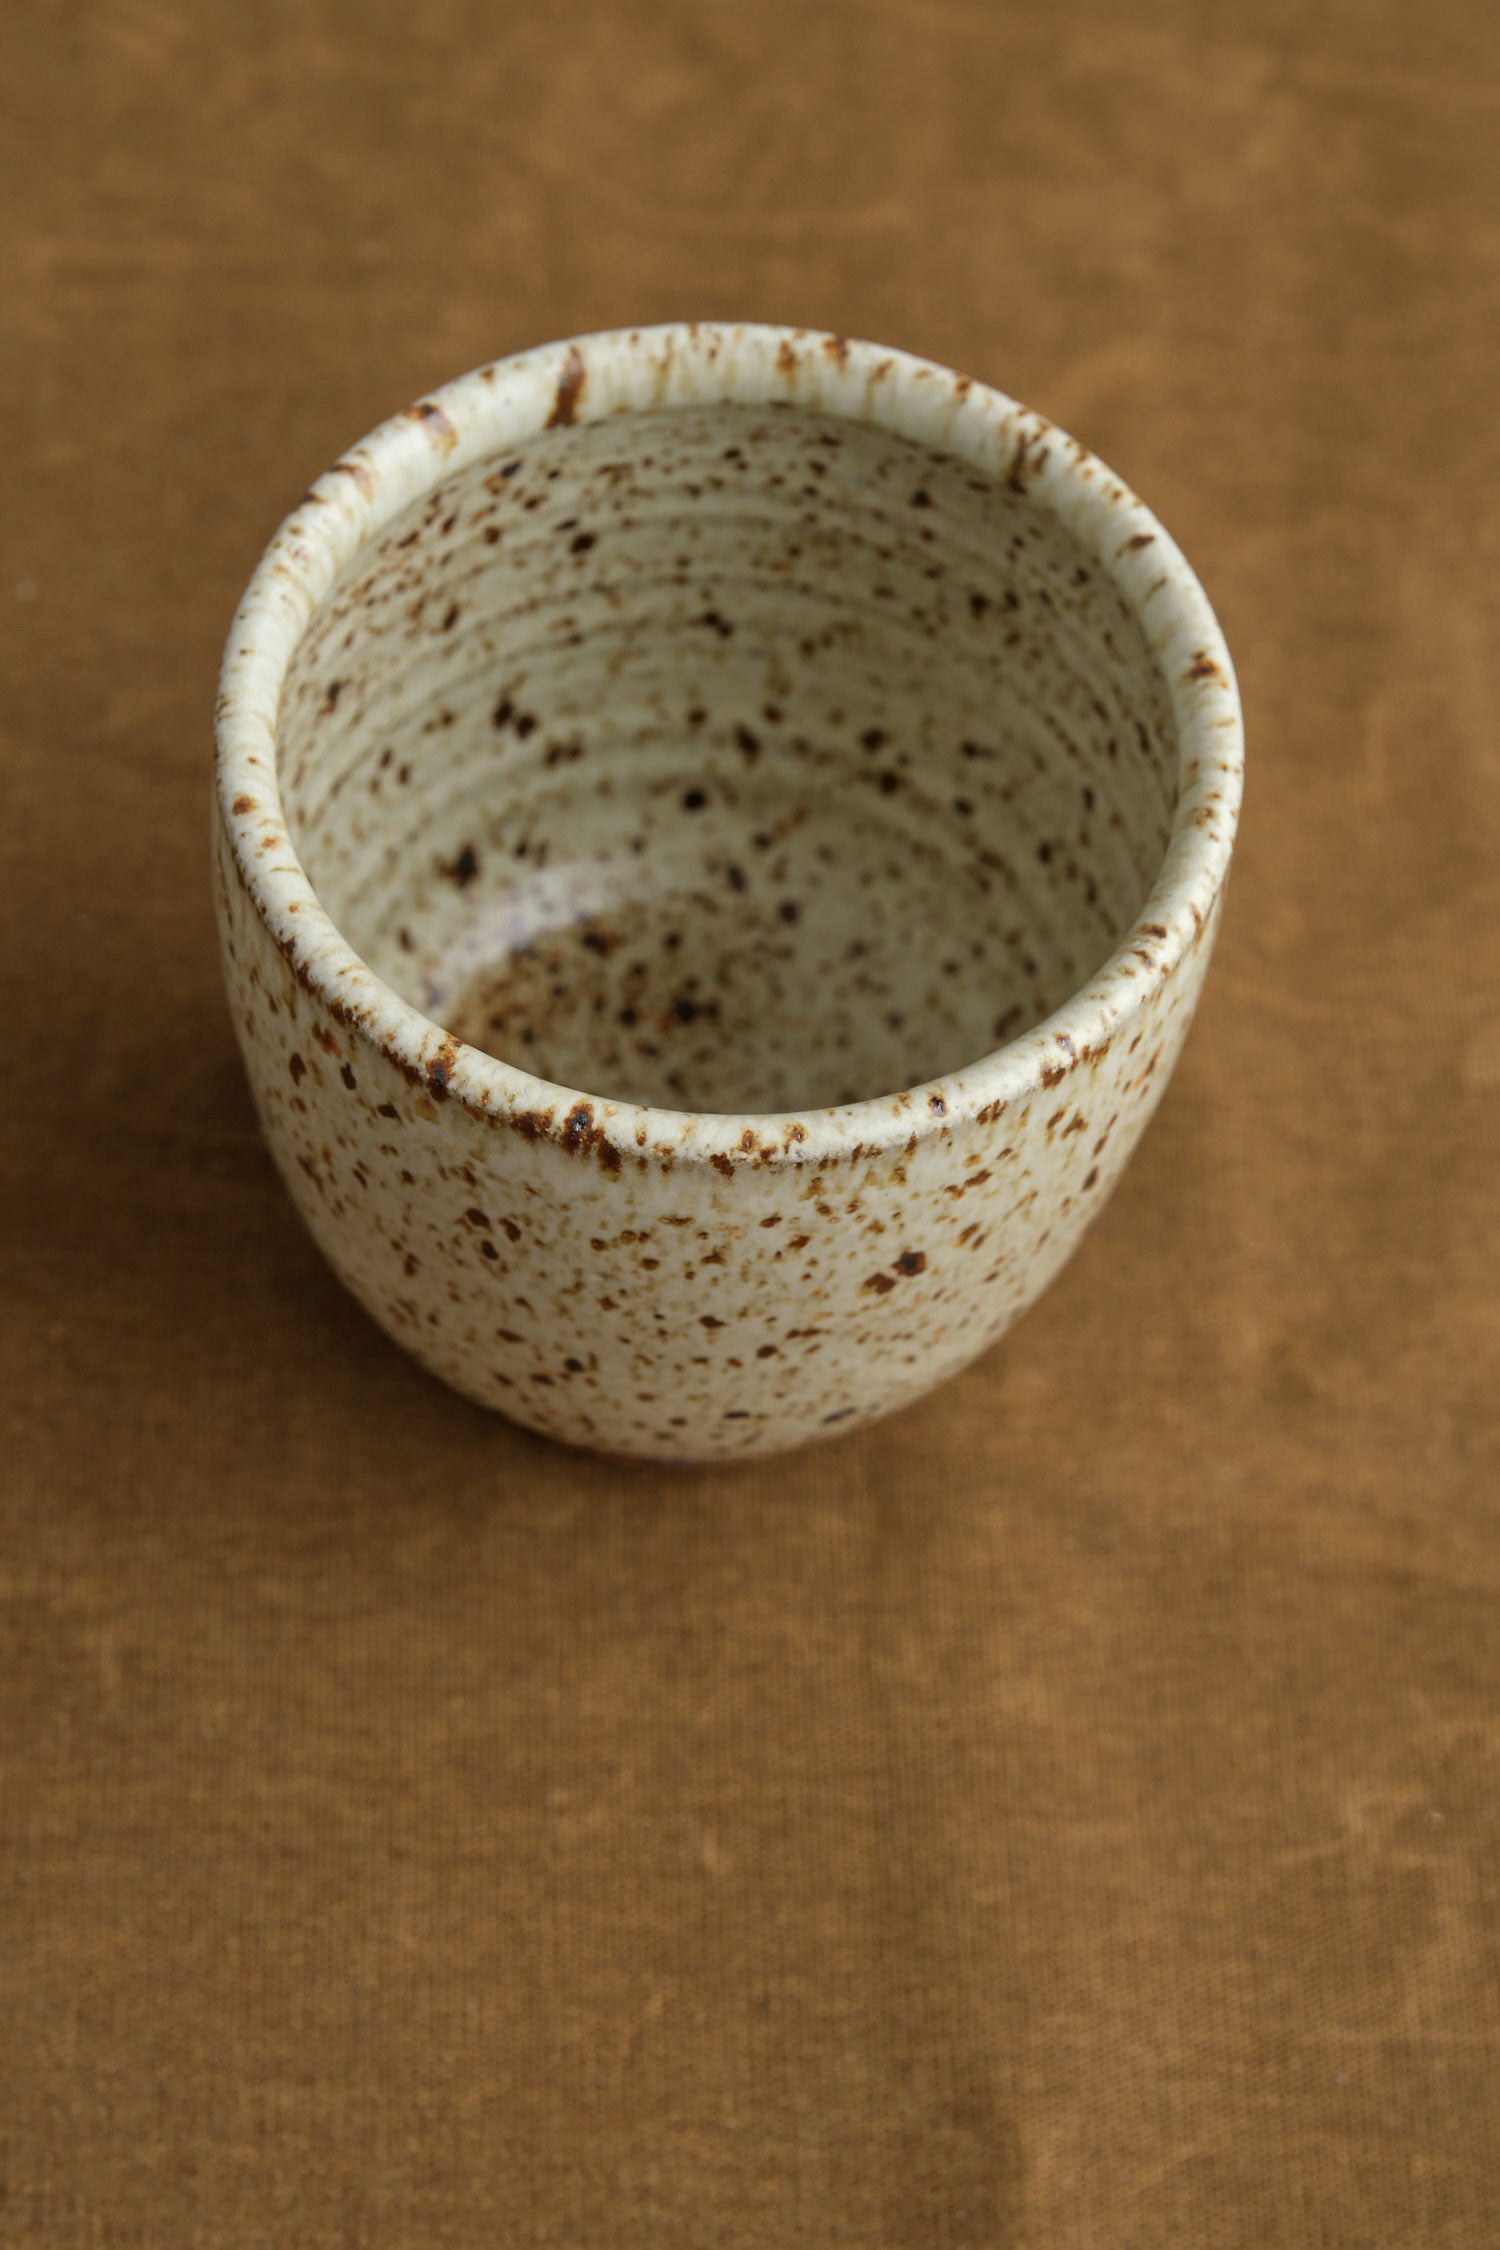 Ceramic Bloomer Cup with speckled glaze